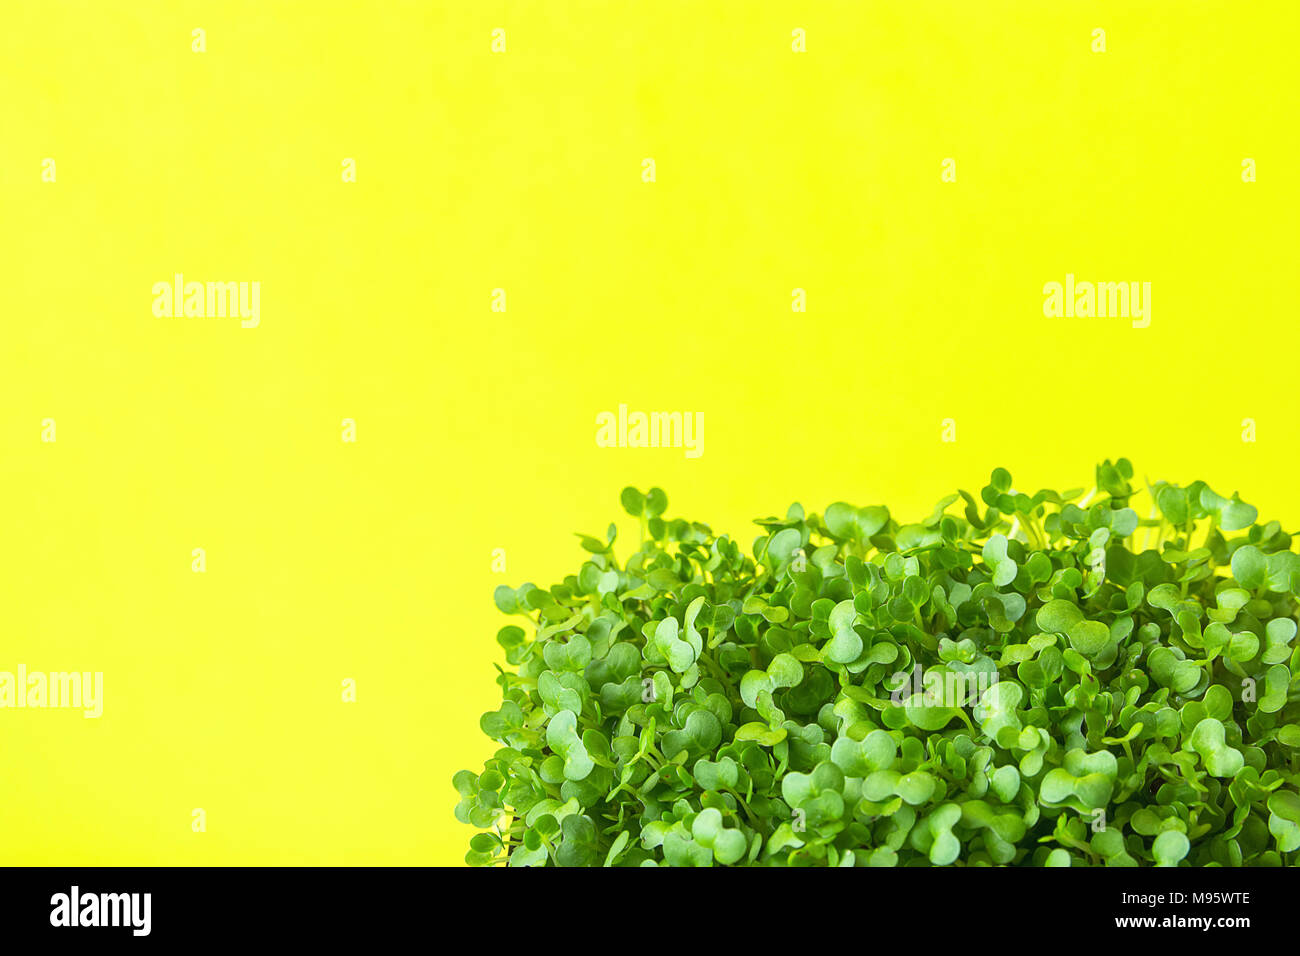 Young Fresh Green Sprouts of Potted Water Cress on Pastel Turquoise Background. Spring Gardening Healthy Plant Based Diet Food Ingredients Garnish Con Stock Photo